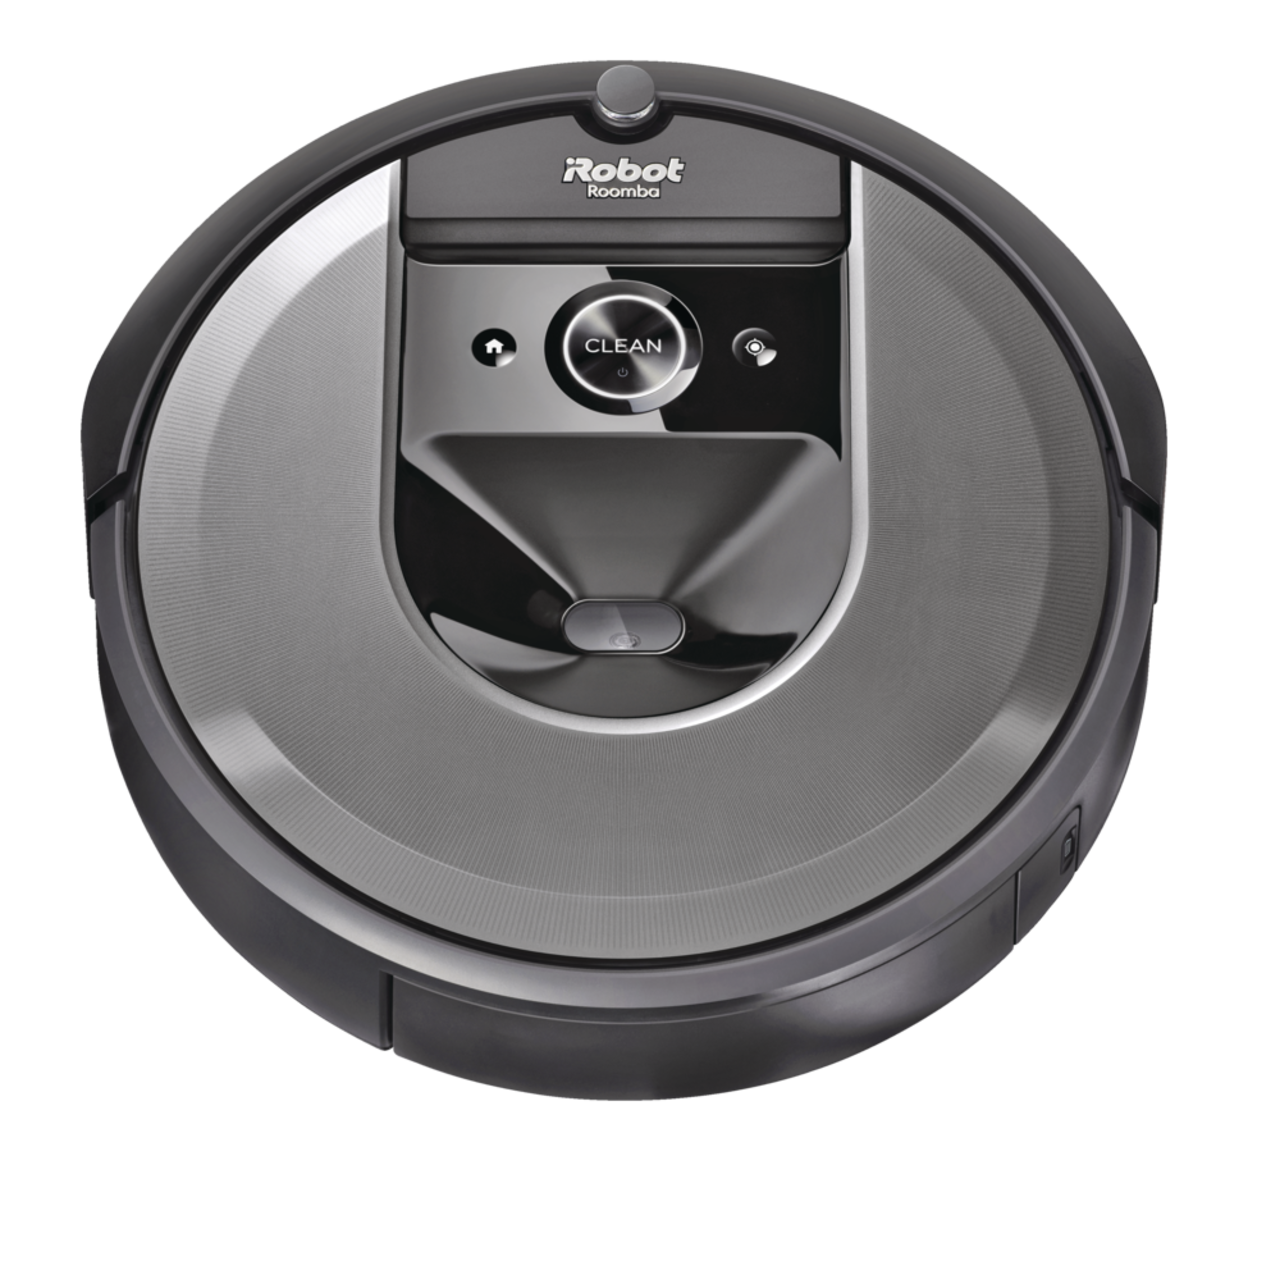  iRobot Roomba i7 (7150) Robot Vacuum- Wi-Fi Connected, Smart  Mapping, Works with Alexa, Ideal for Pet Hair, Works with Clean Base